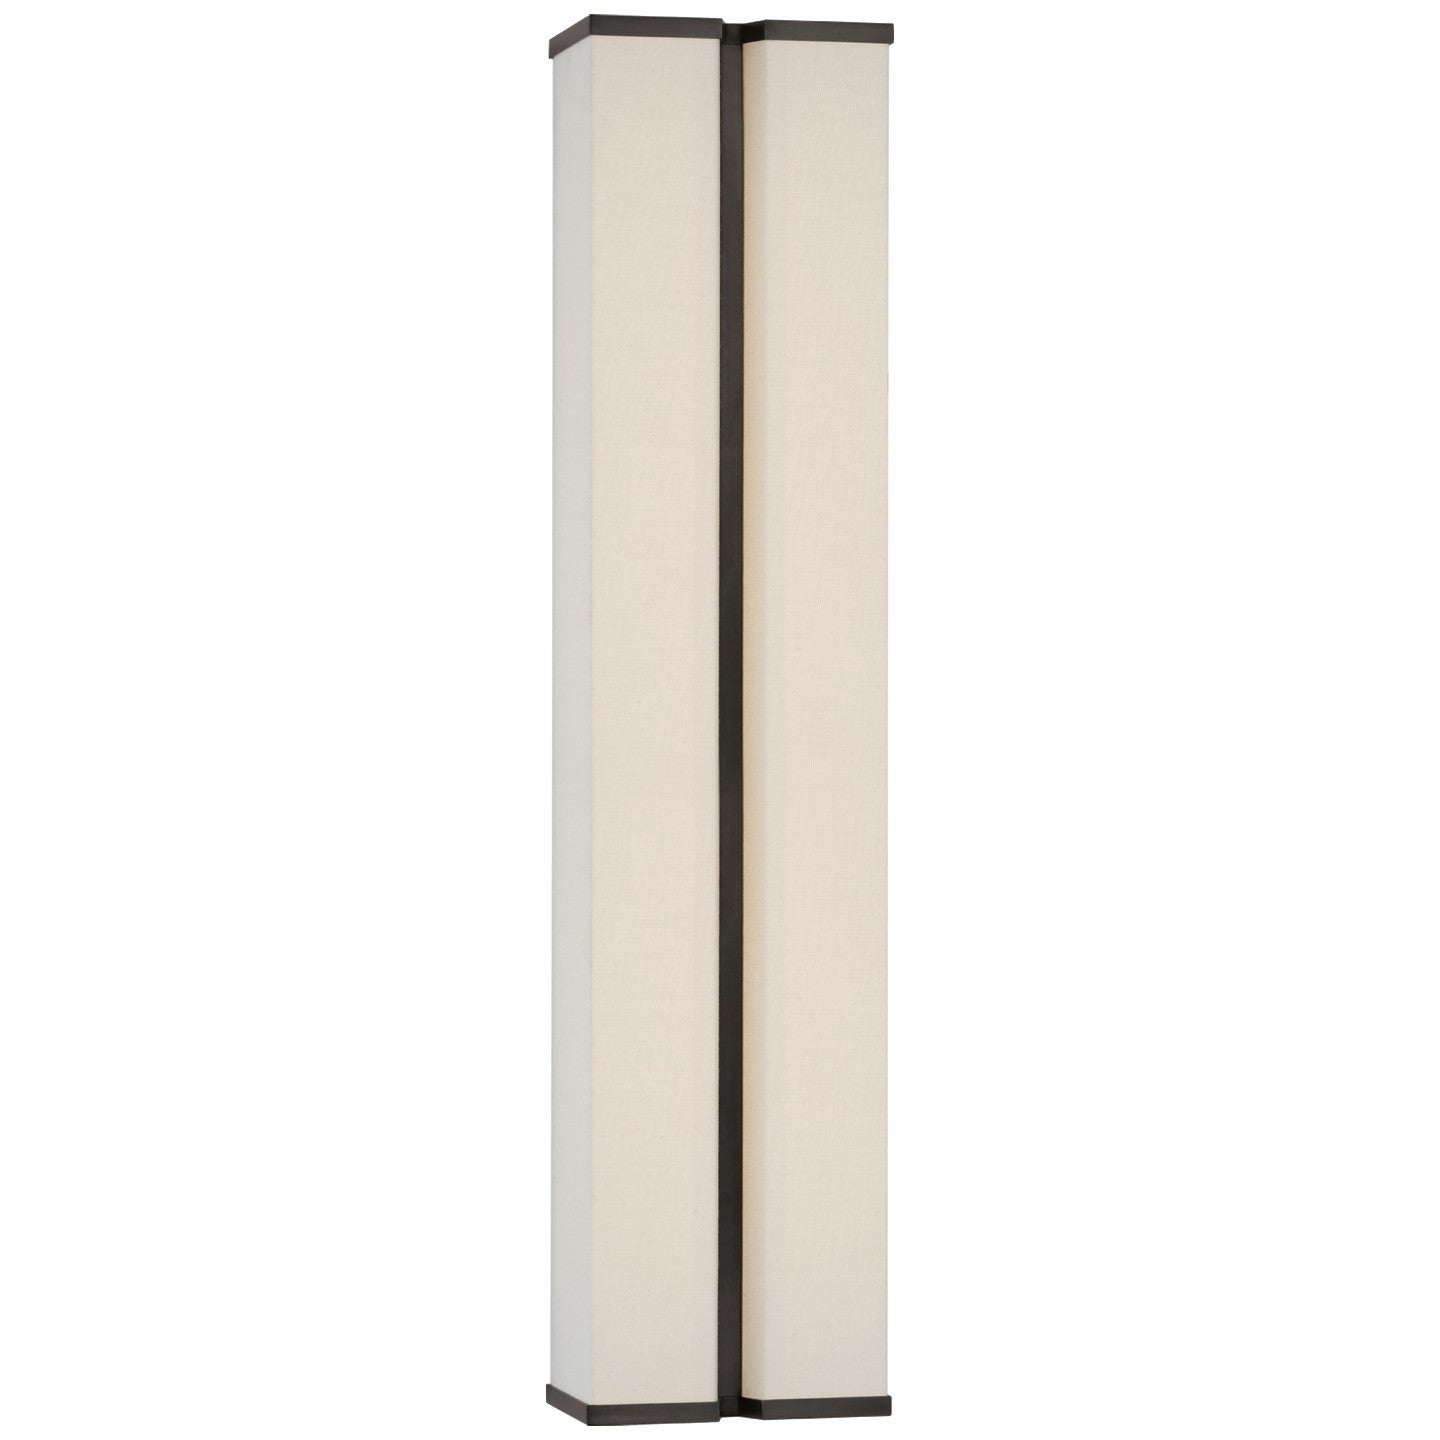 Visual Comfort Signature - PCD 2251BZ/L - LED Wall Sconce - Vernet - Bronze and Linen